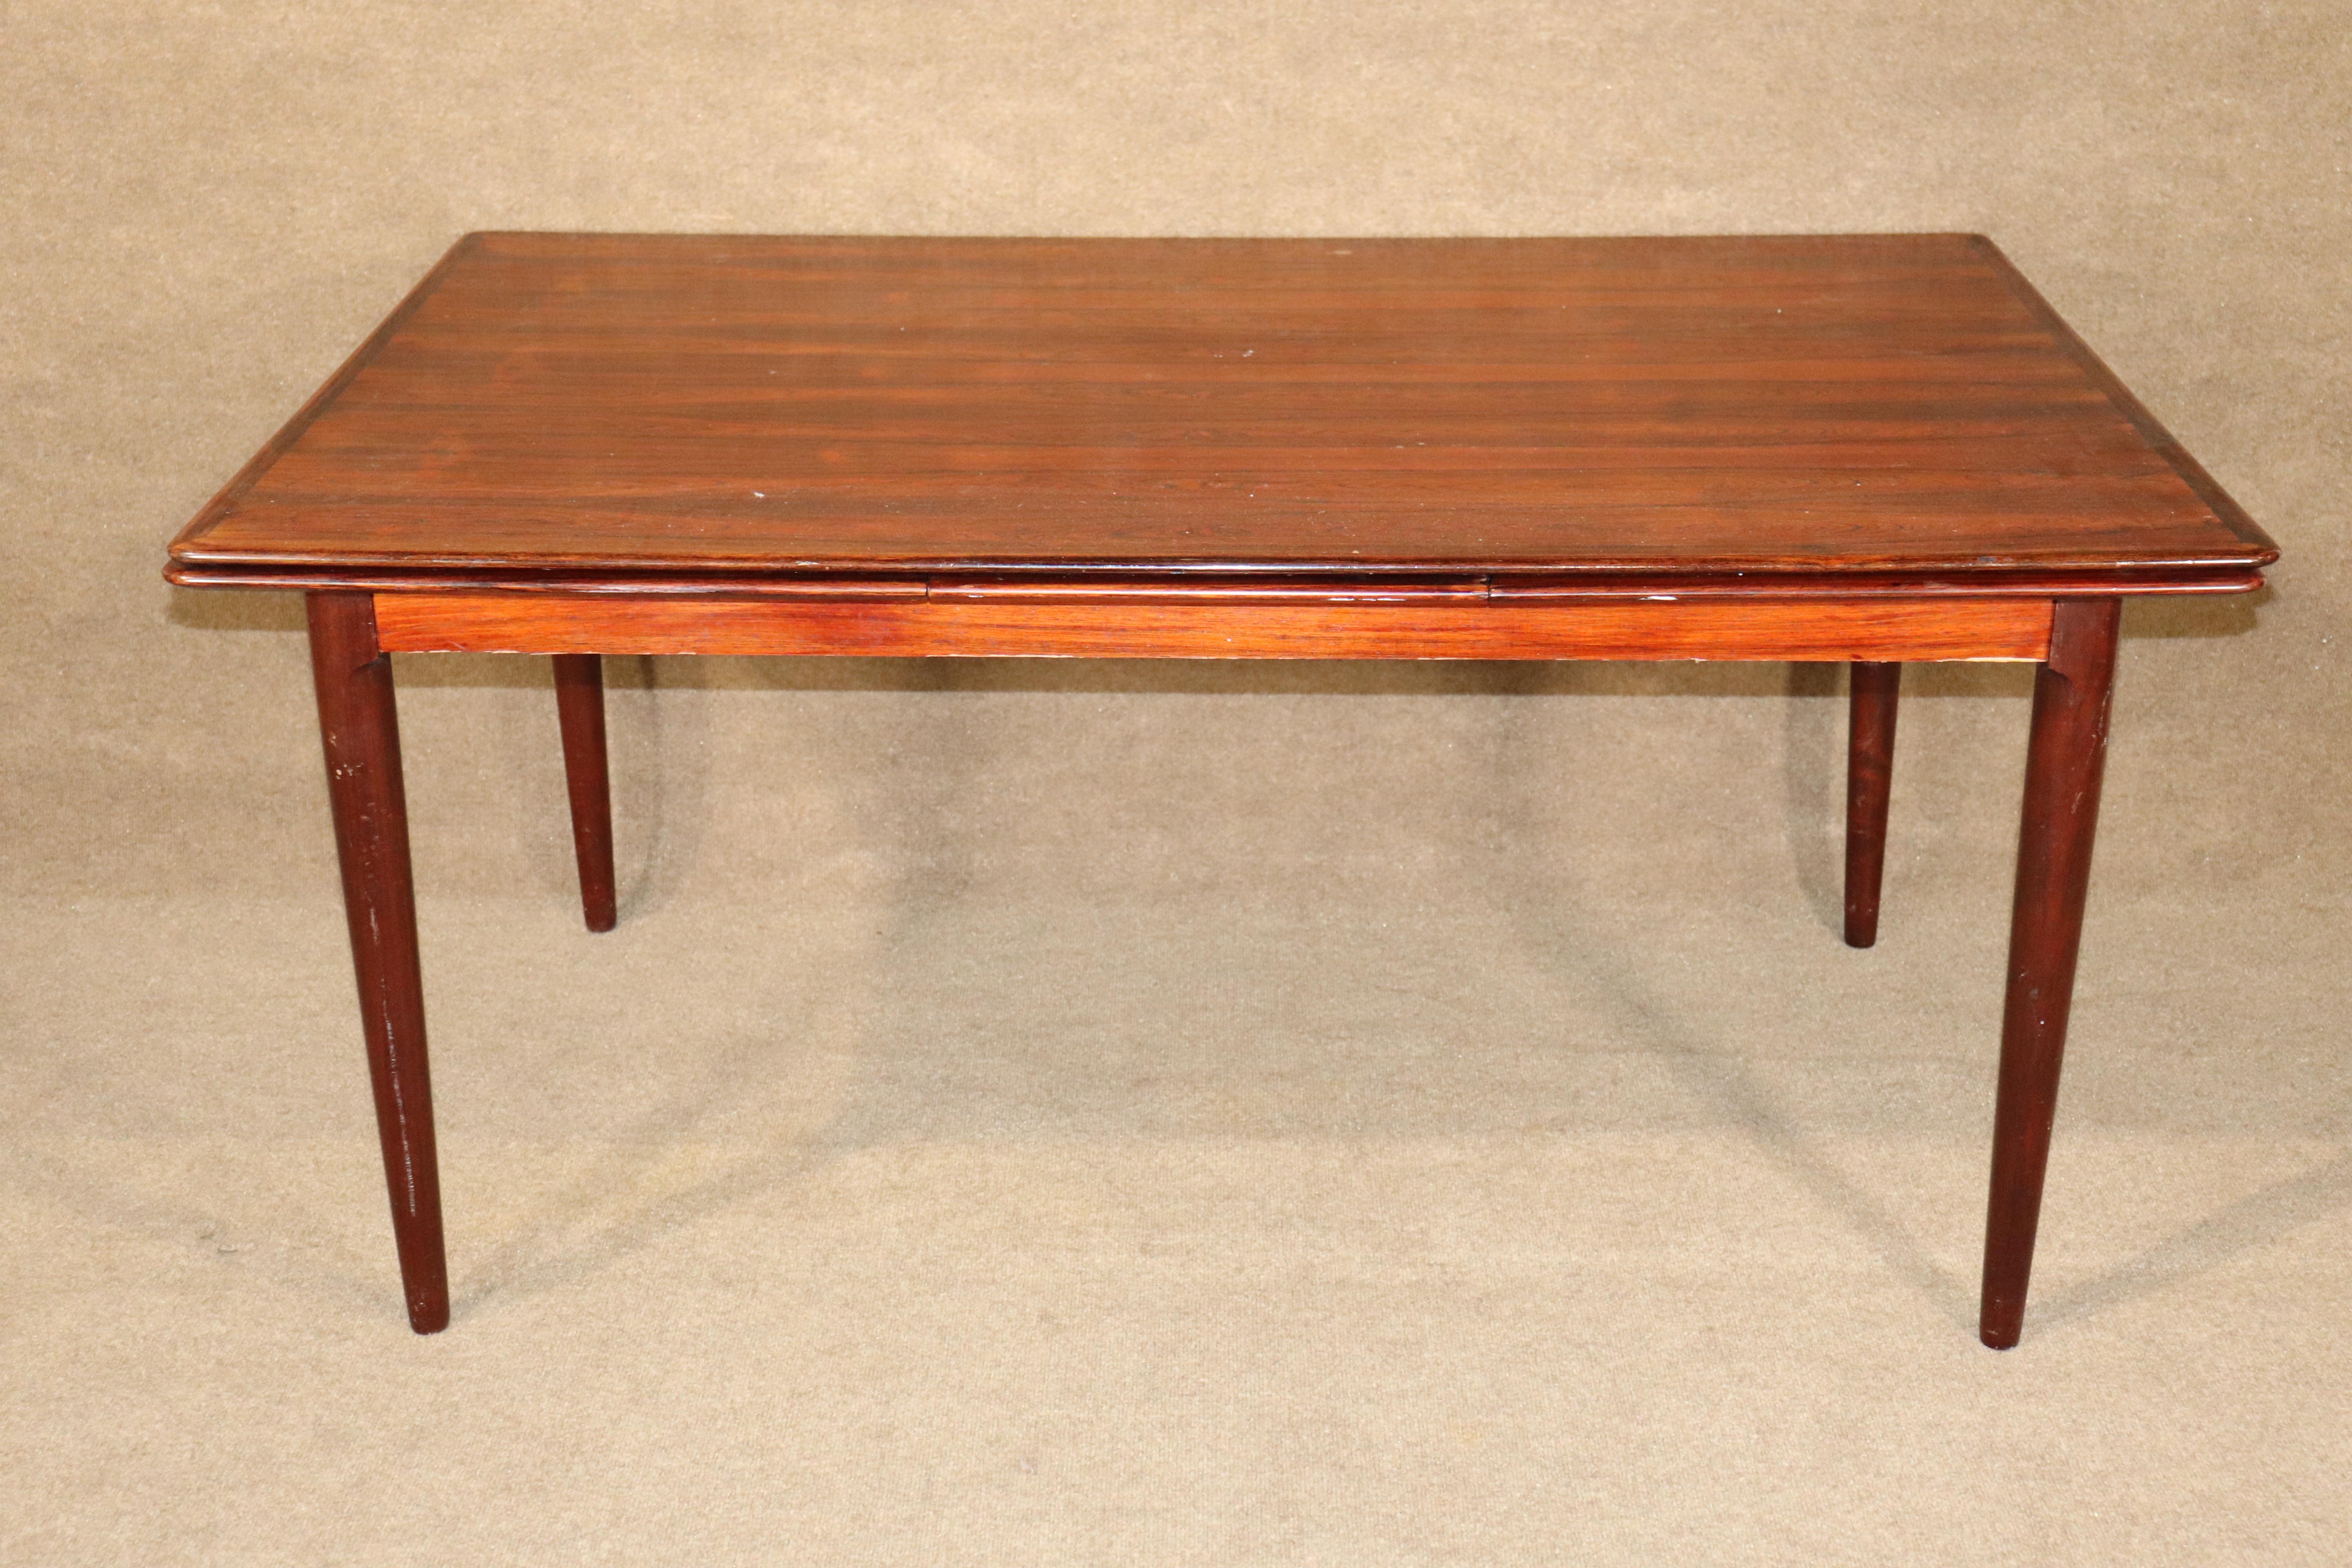 Mid-Century Modern dining table in rich rosewood grain. Danish made with two extra leaves that store underneath the table top, and pullout for more room.
Please confirm location NY or NJ.